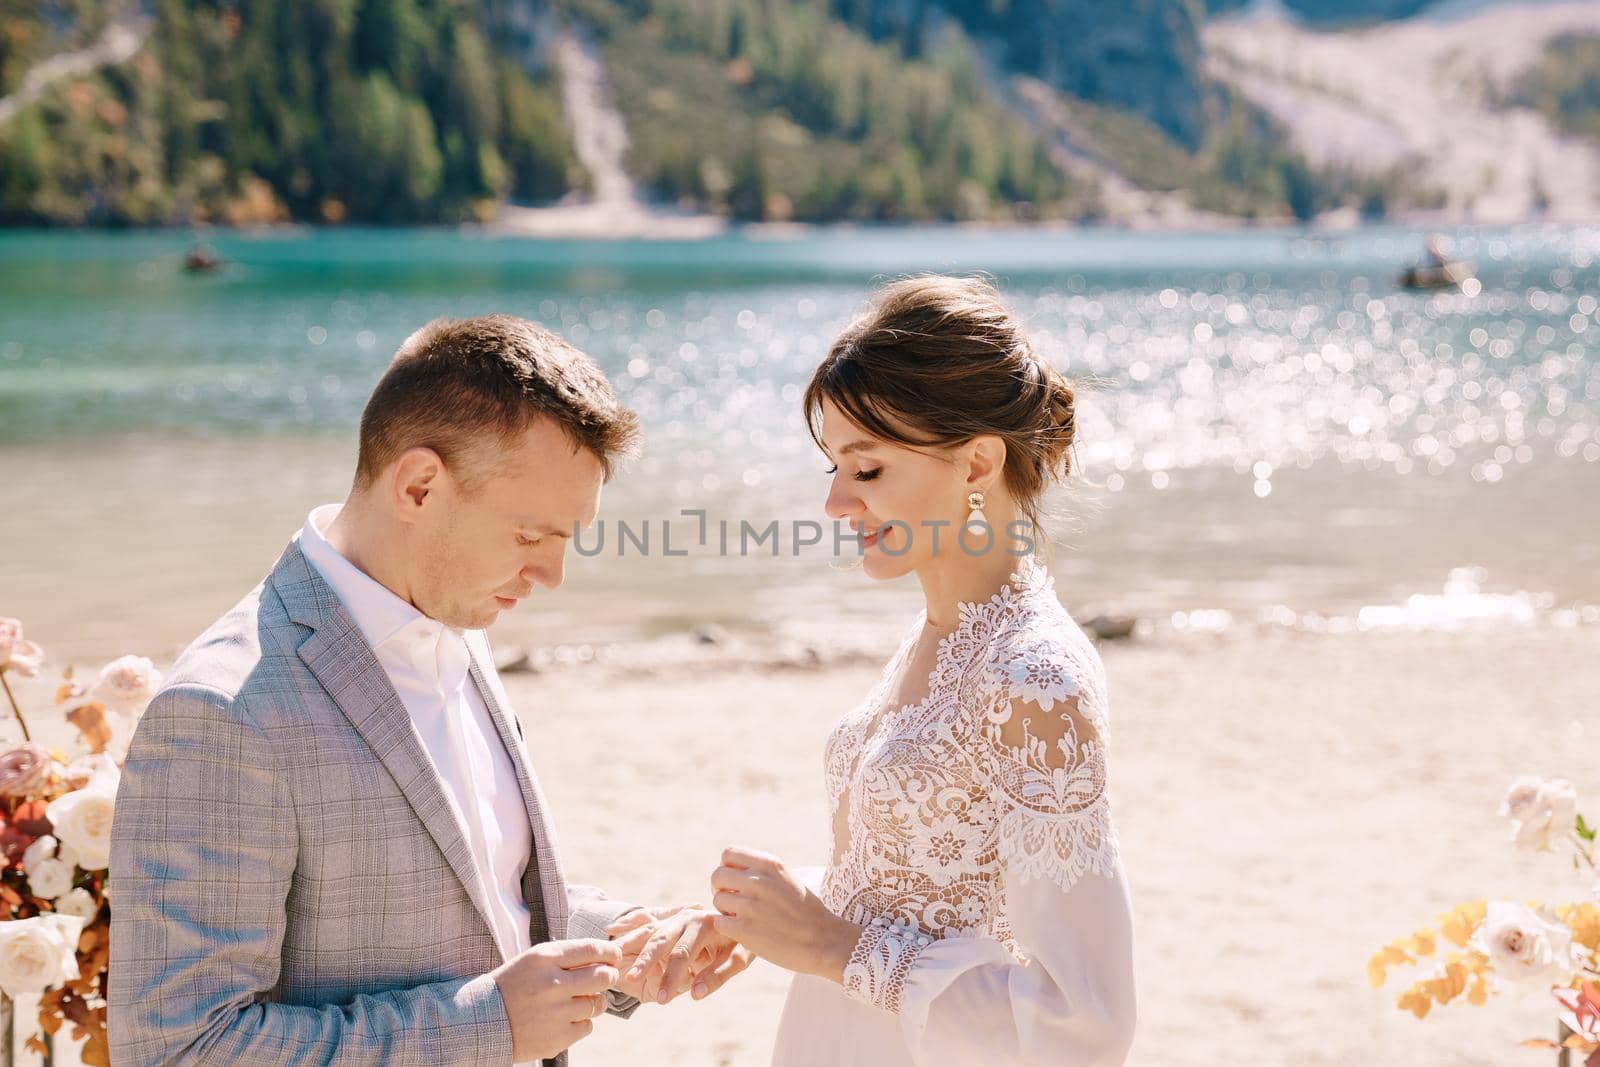 The groom dons a bride's ring, in place for the ceremony, with an arch of autumn floral columns, against the backdrop of Lago di Braies in Italy. Destination wedding in Europe, at Braies lake.